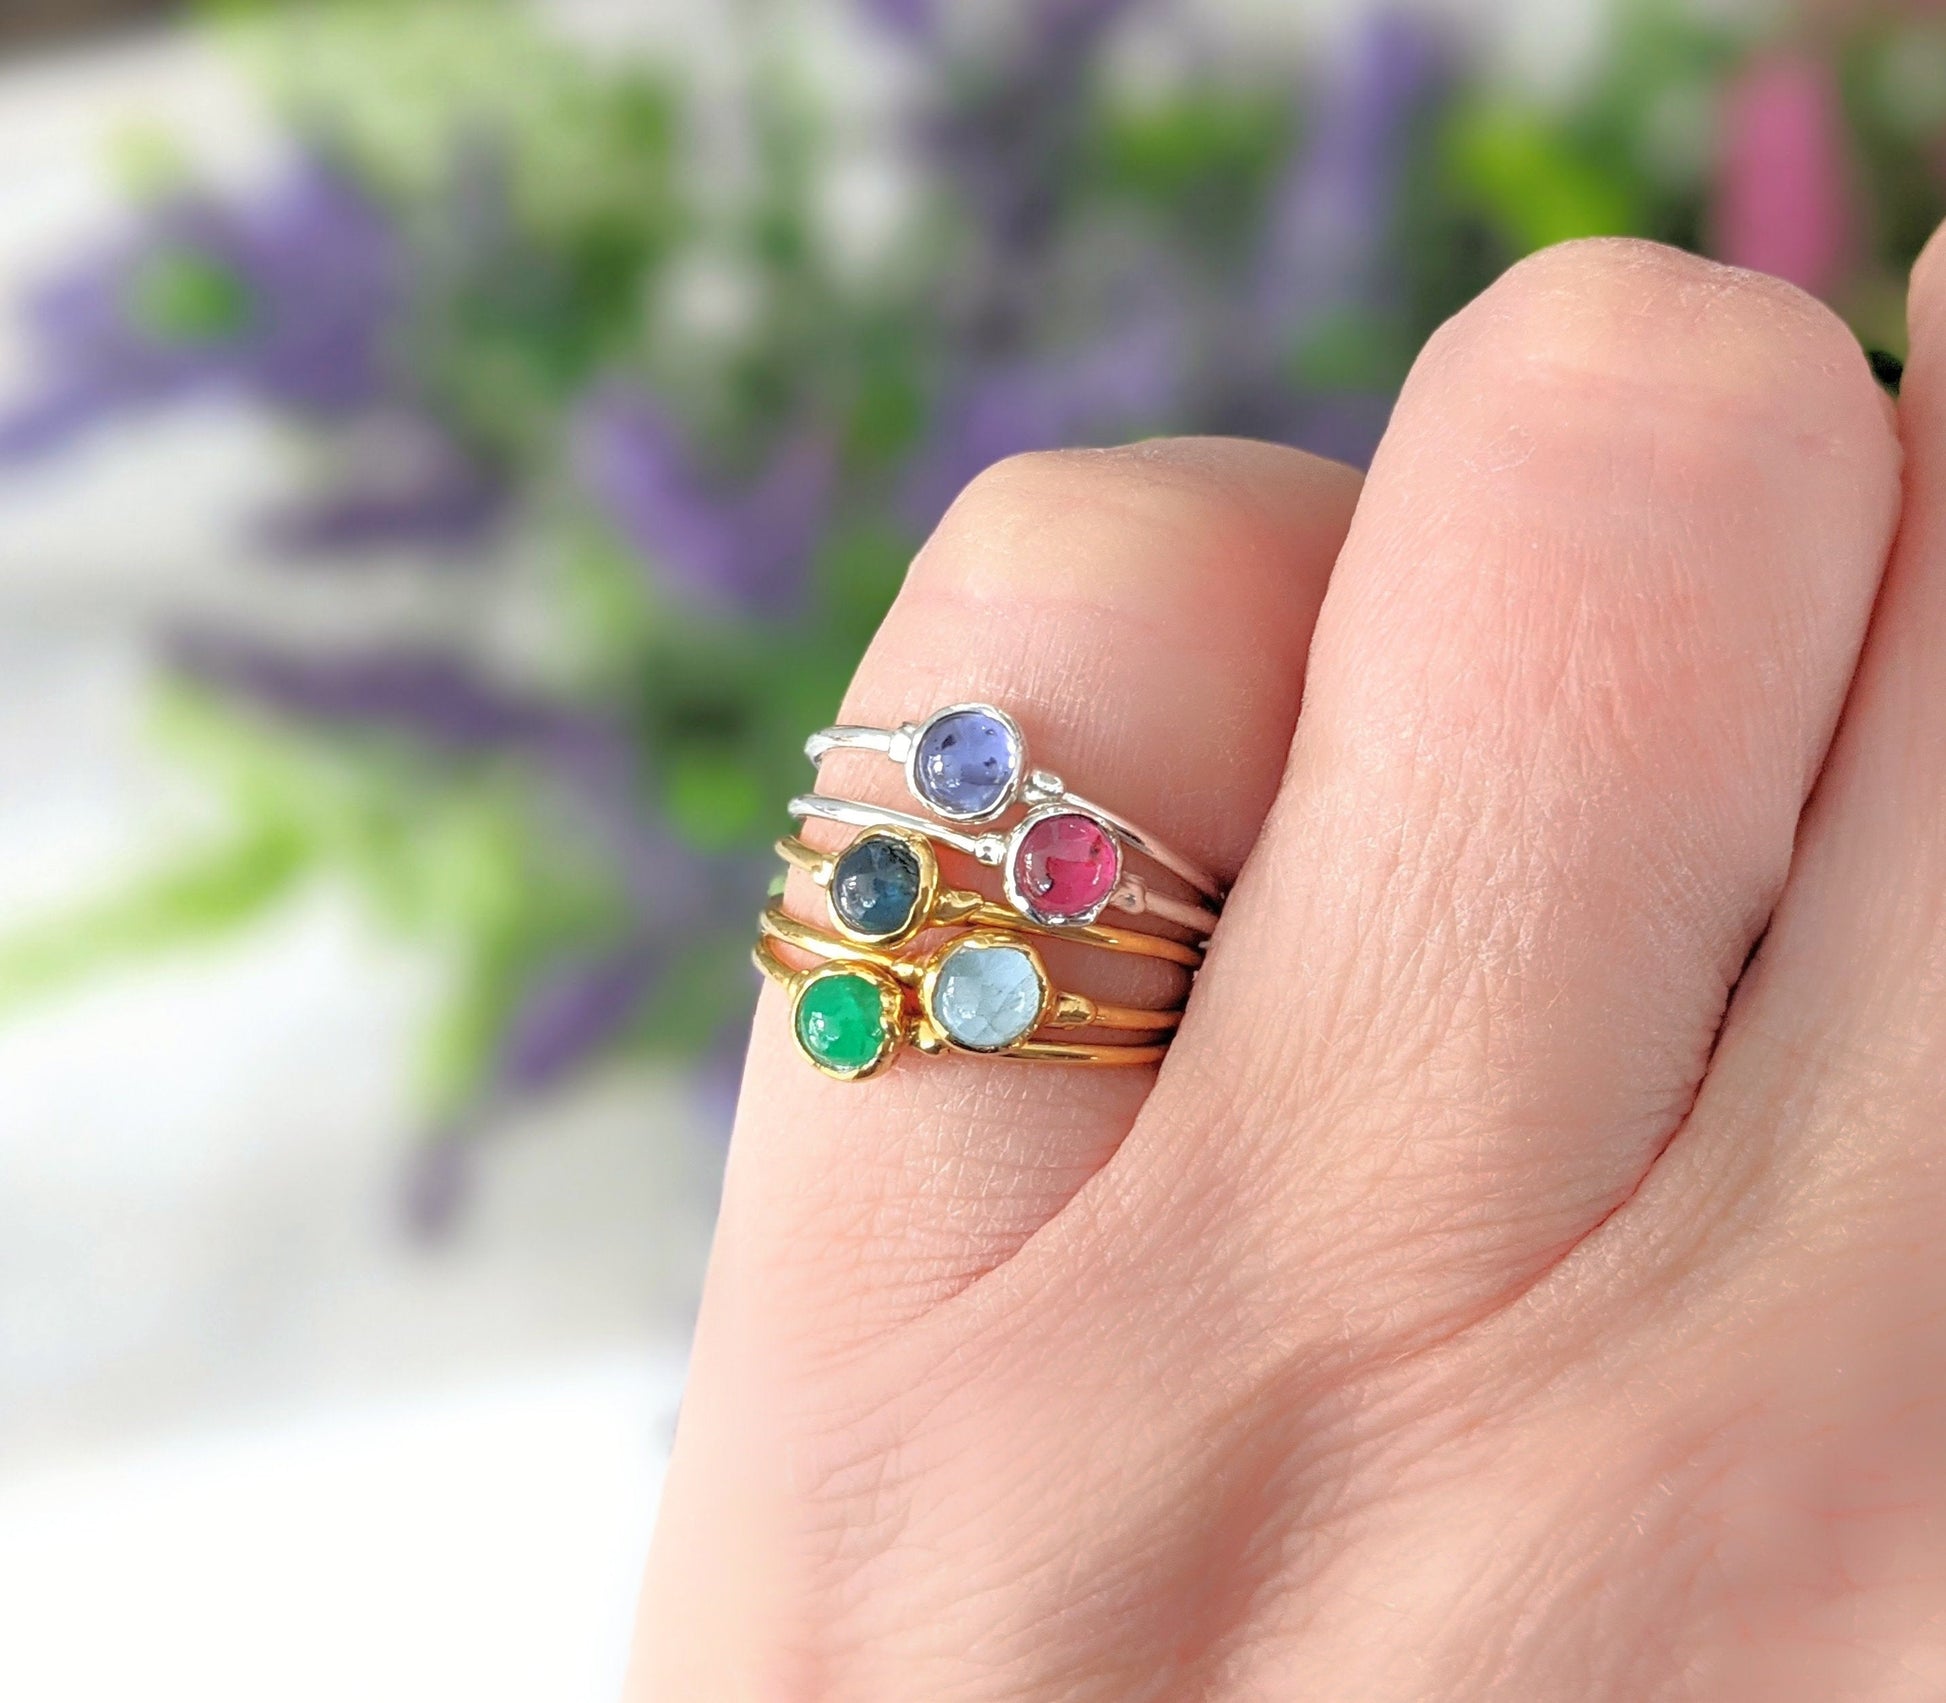 Dainty Birthstone Stacking rings in unique Sterling Silver or 18k Gold setting